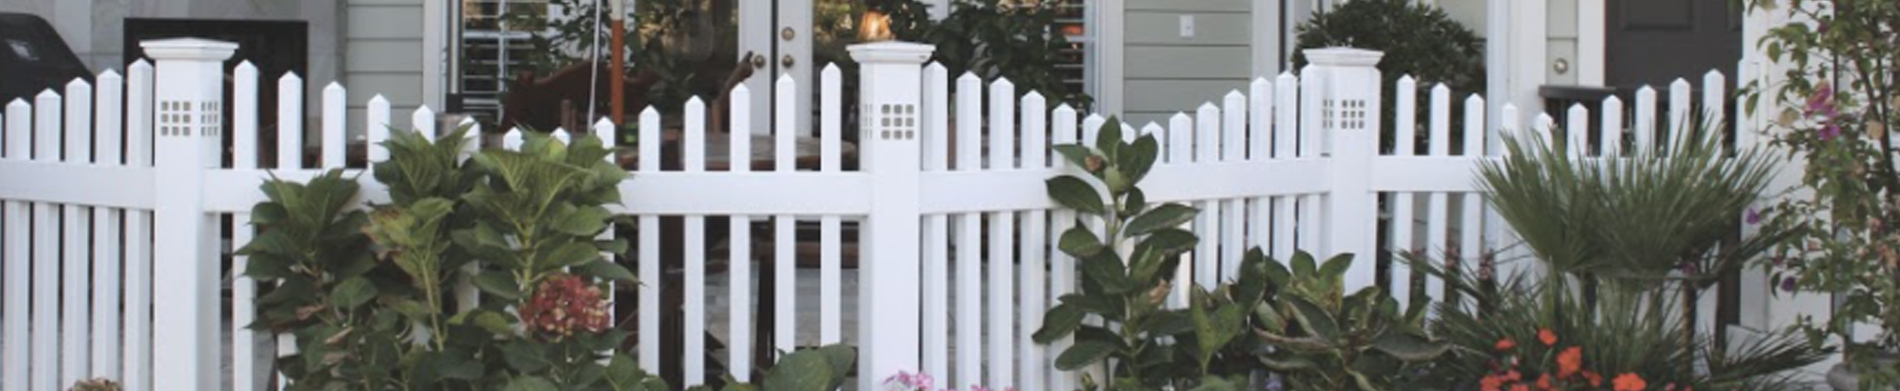 Install a vinyl fence and get rid of high maintenance or frequent repairs